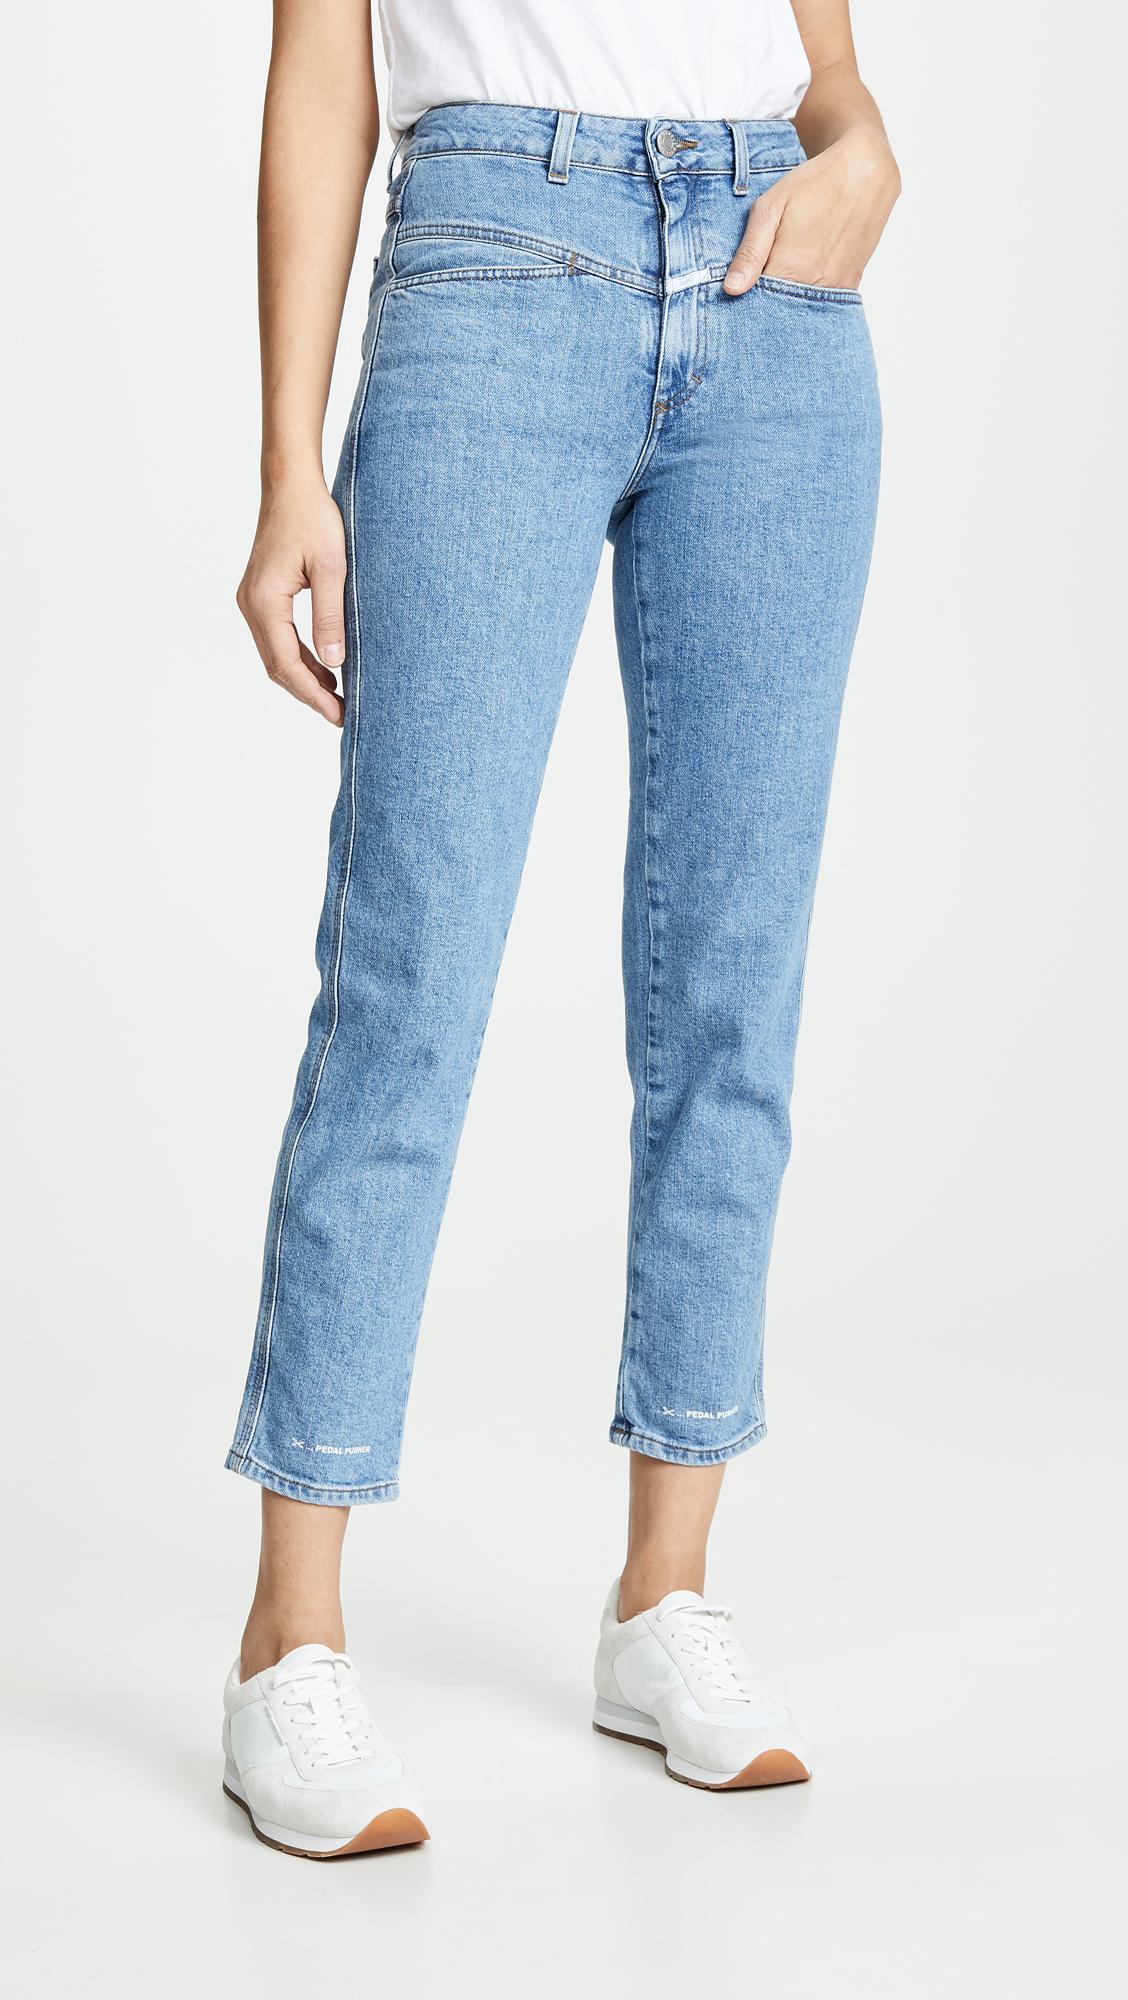 Closed Denim Pedal Pusher Jeans in Mid Blue (Blue) - Lyst